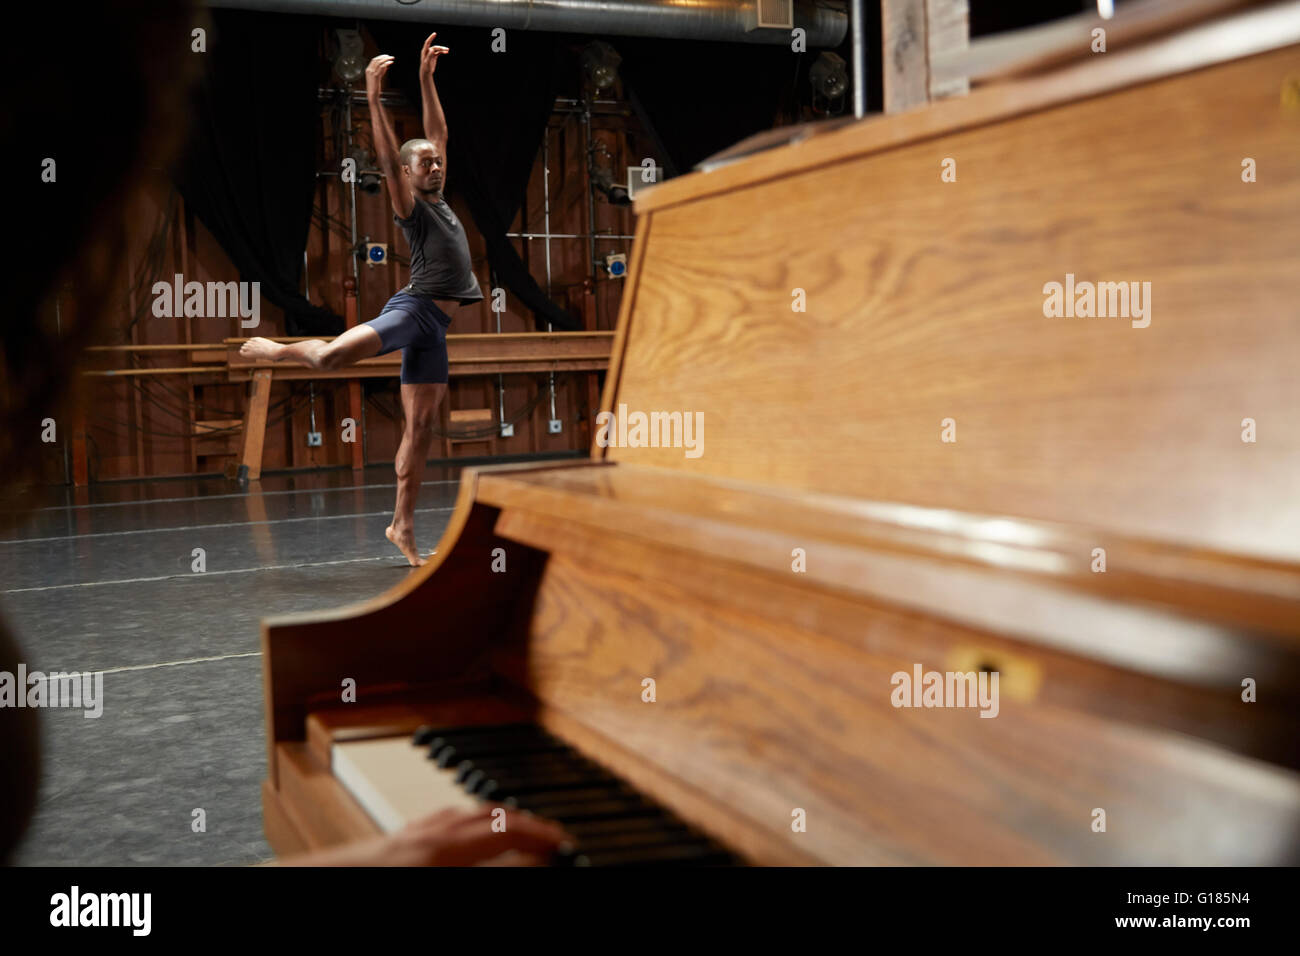 Ballet dancer in position, piano in foreground Stock Photo